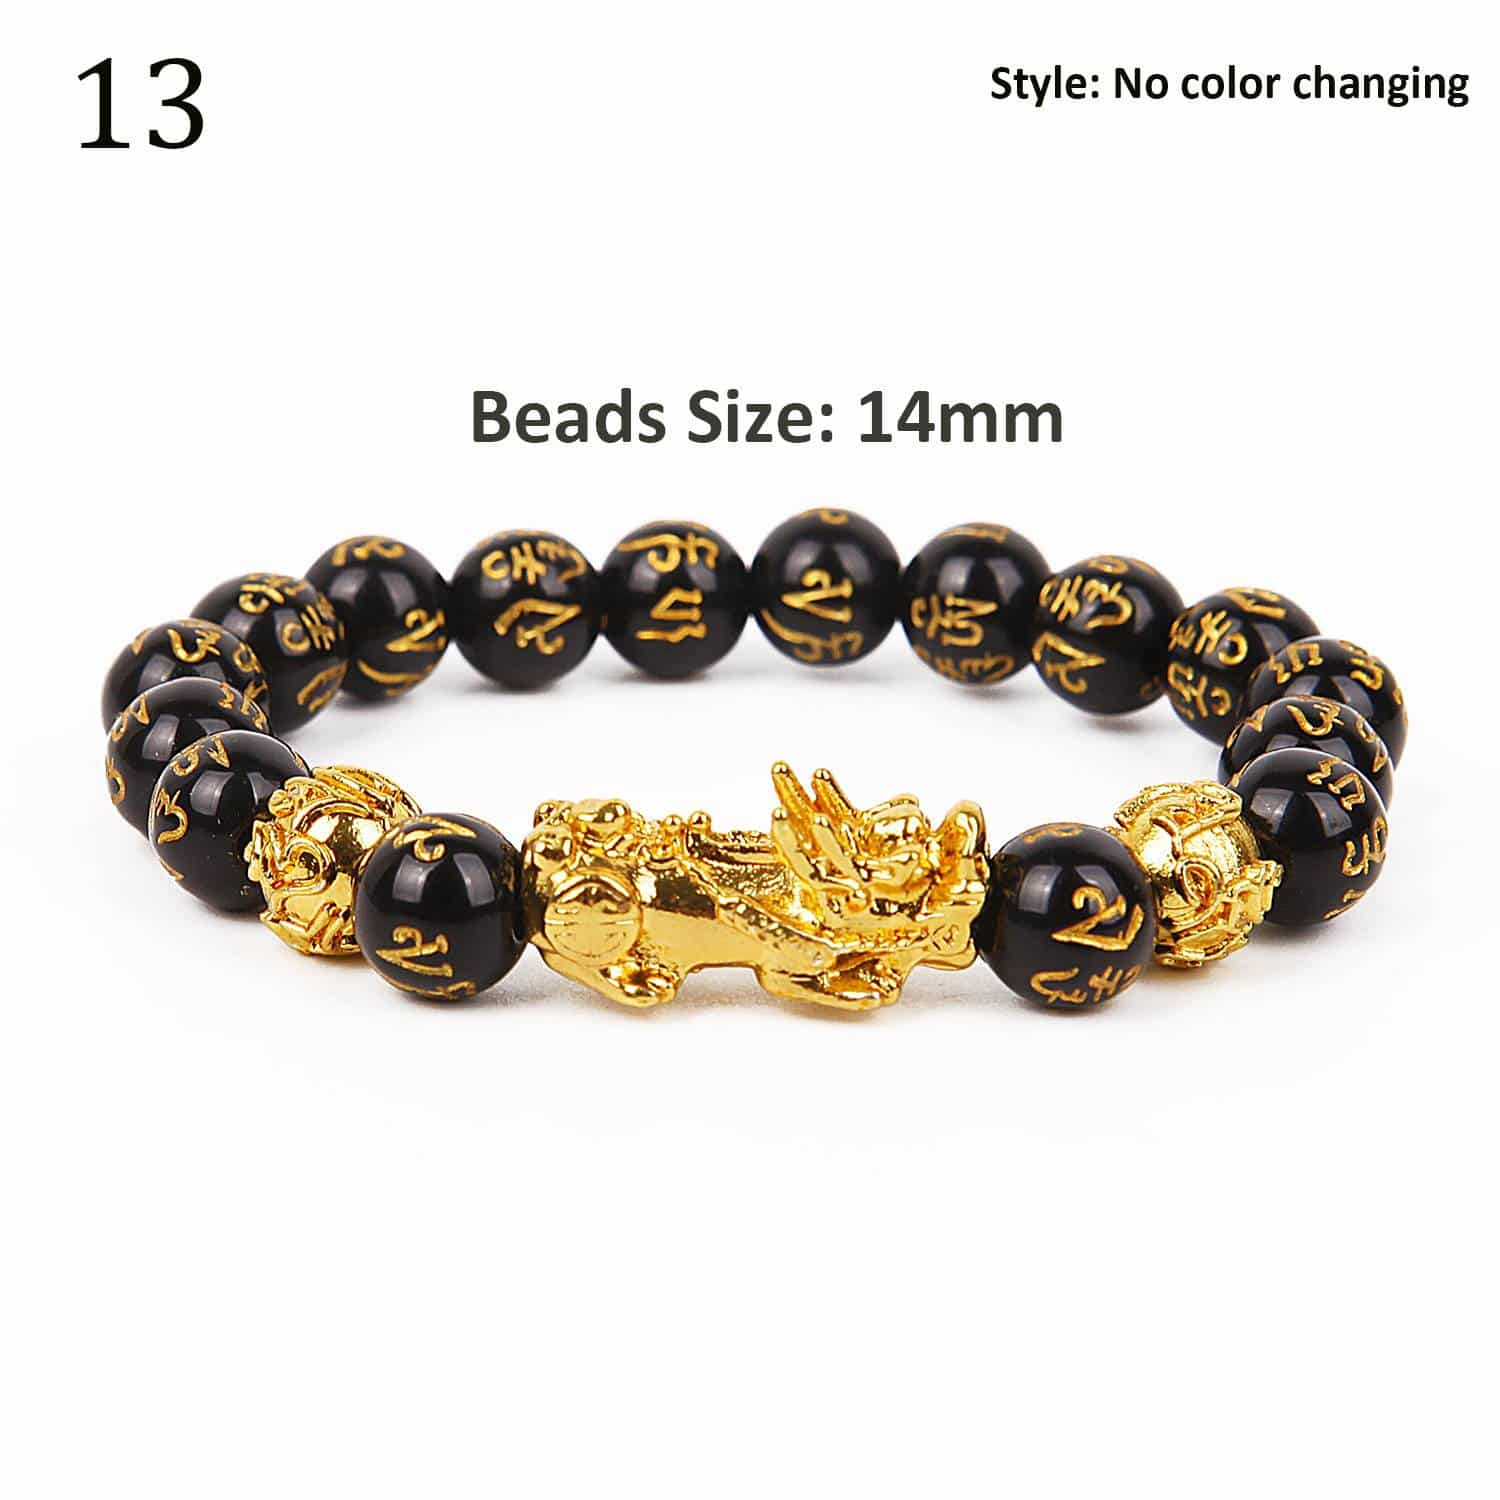 13 (Beads size 14mm)